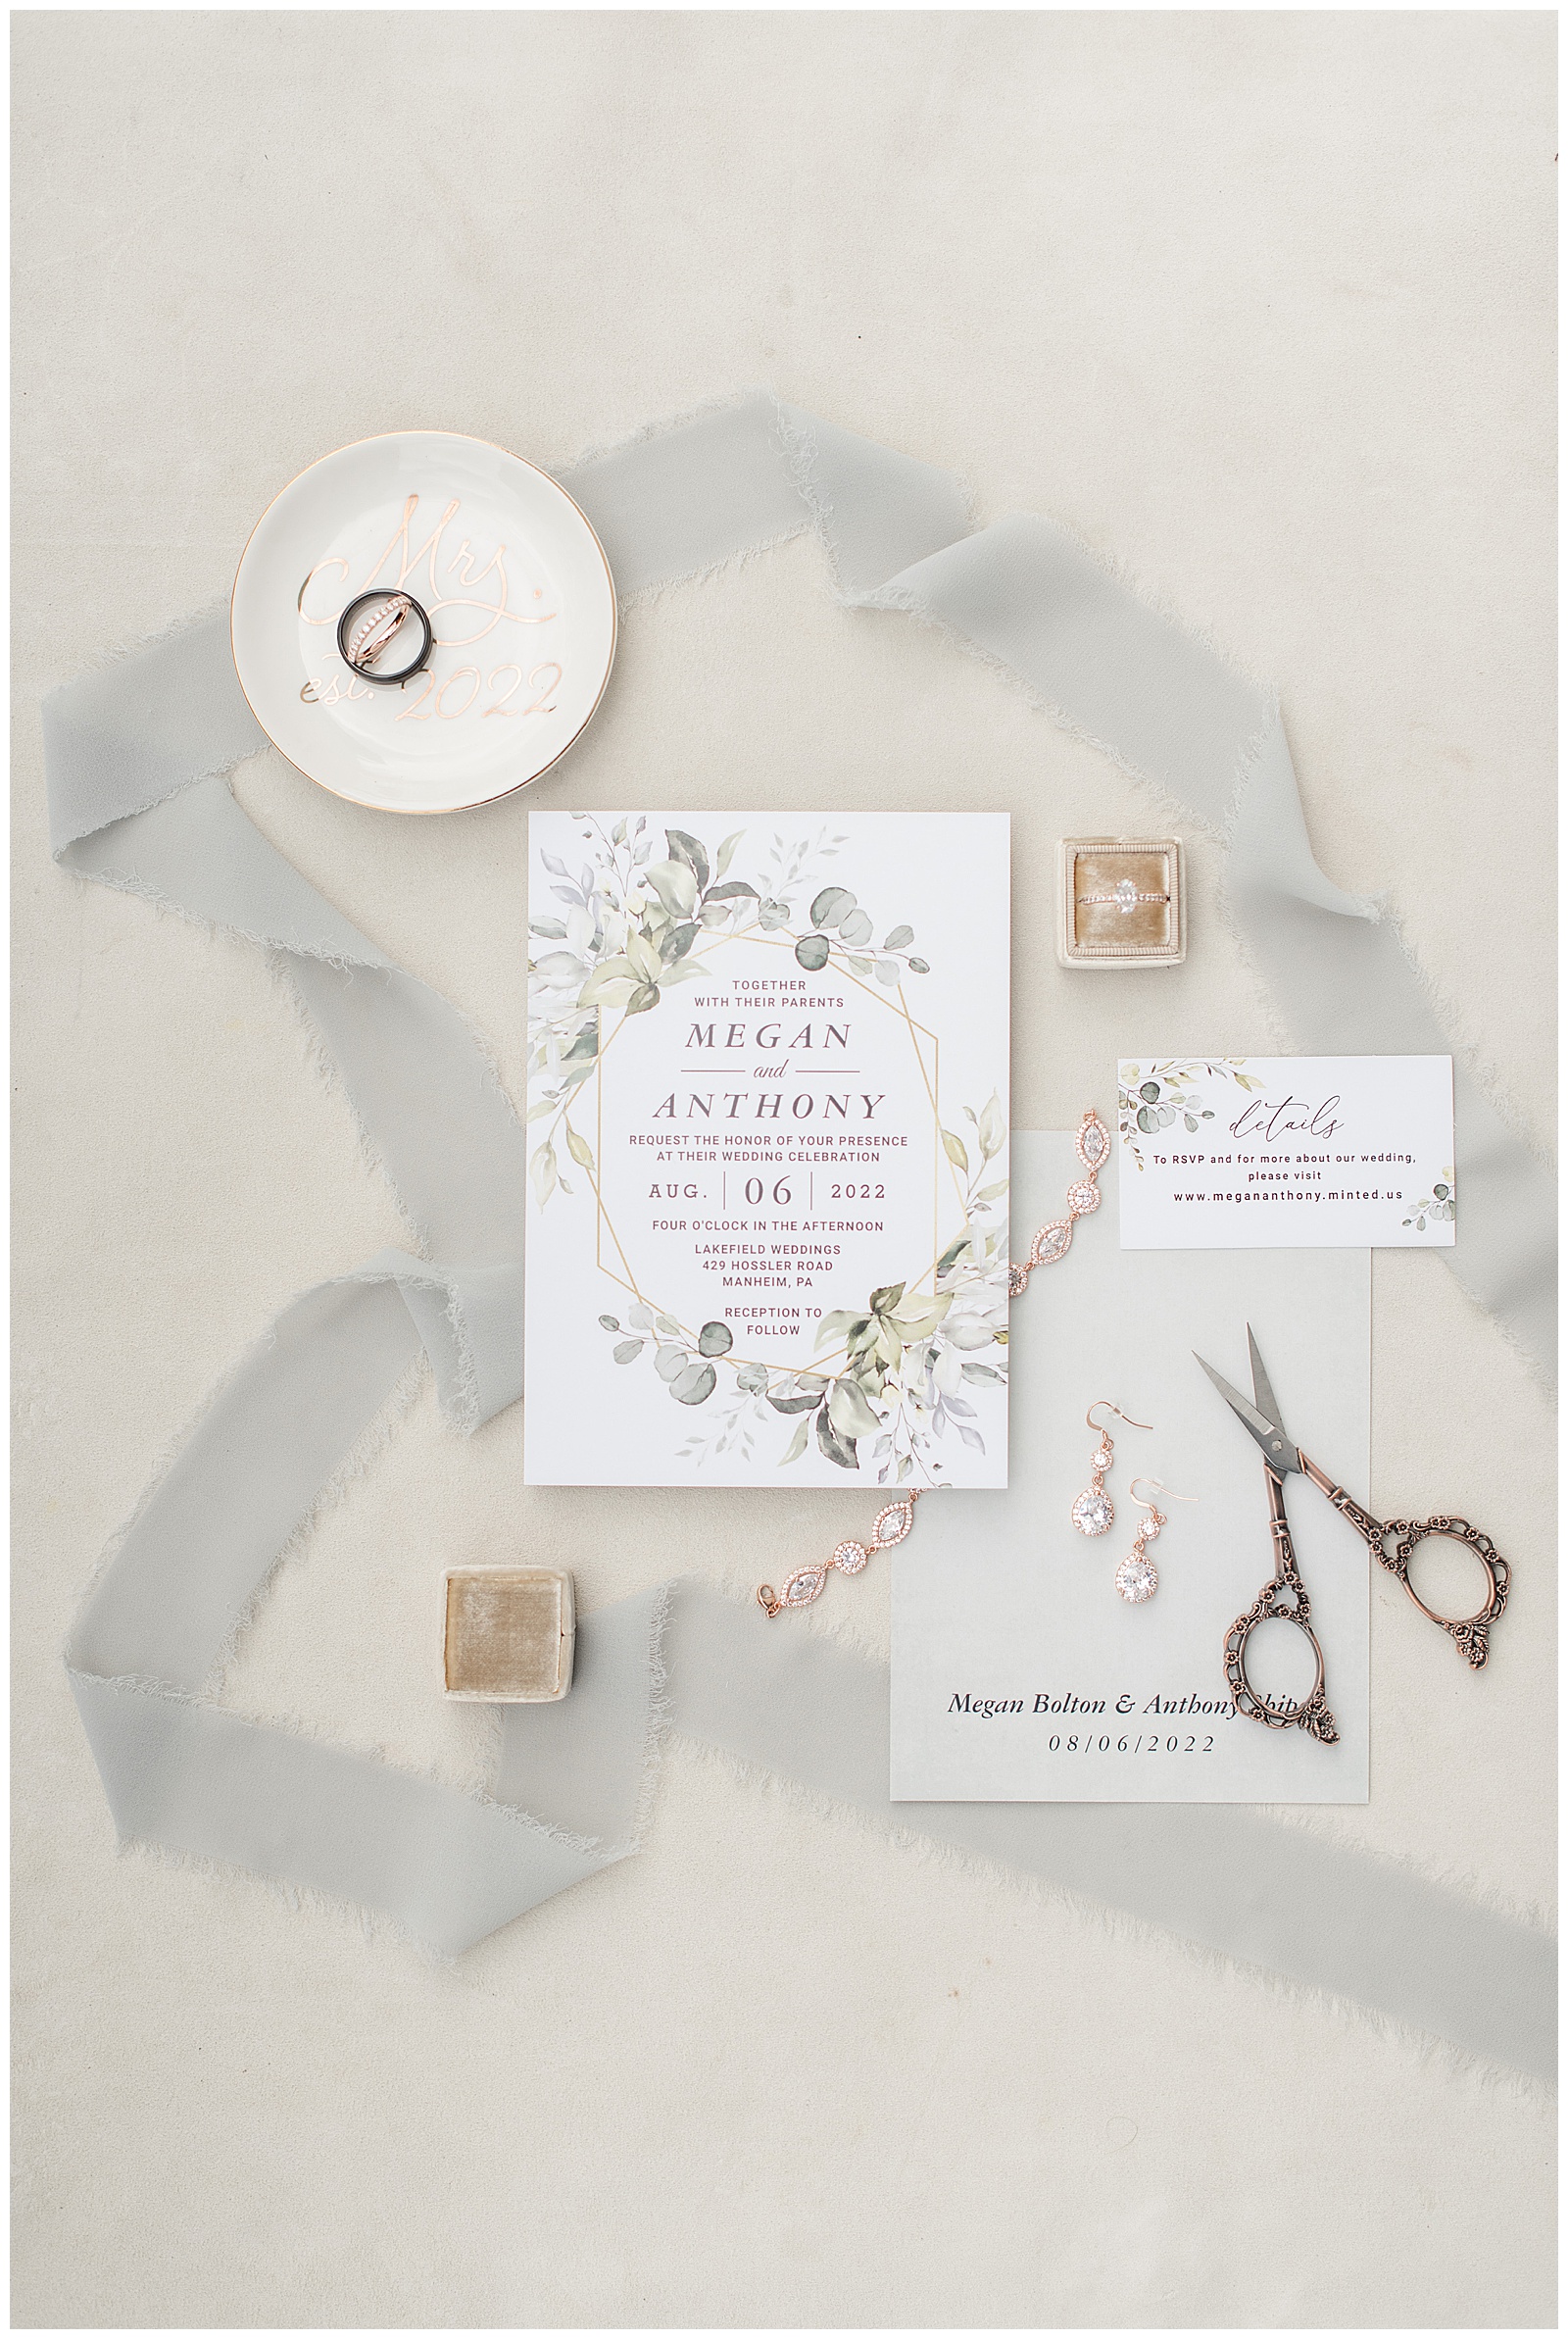 wedding invitation surrounded by gray ribbon, antique scissors, wedding rings and jewelry at lakefield weddings